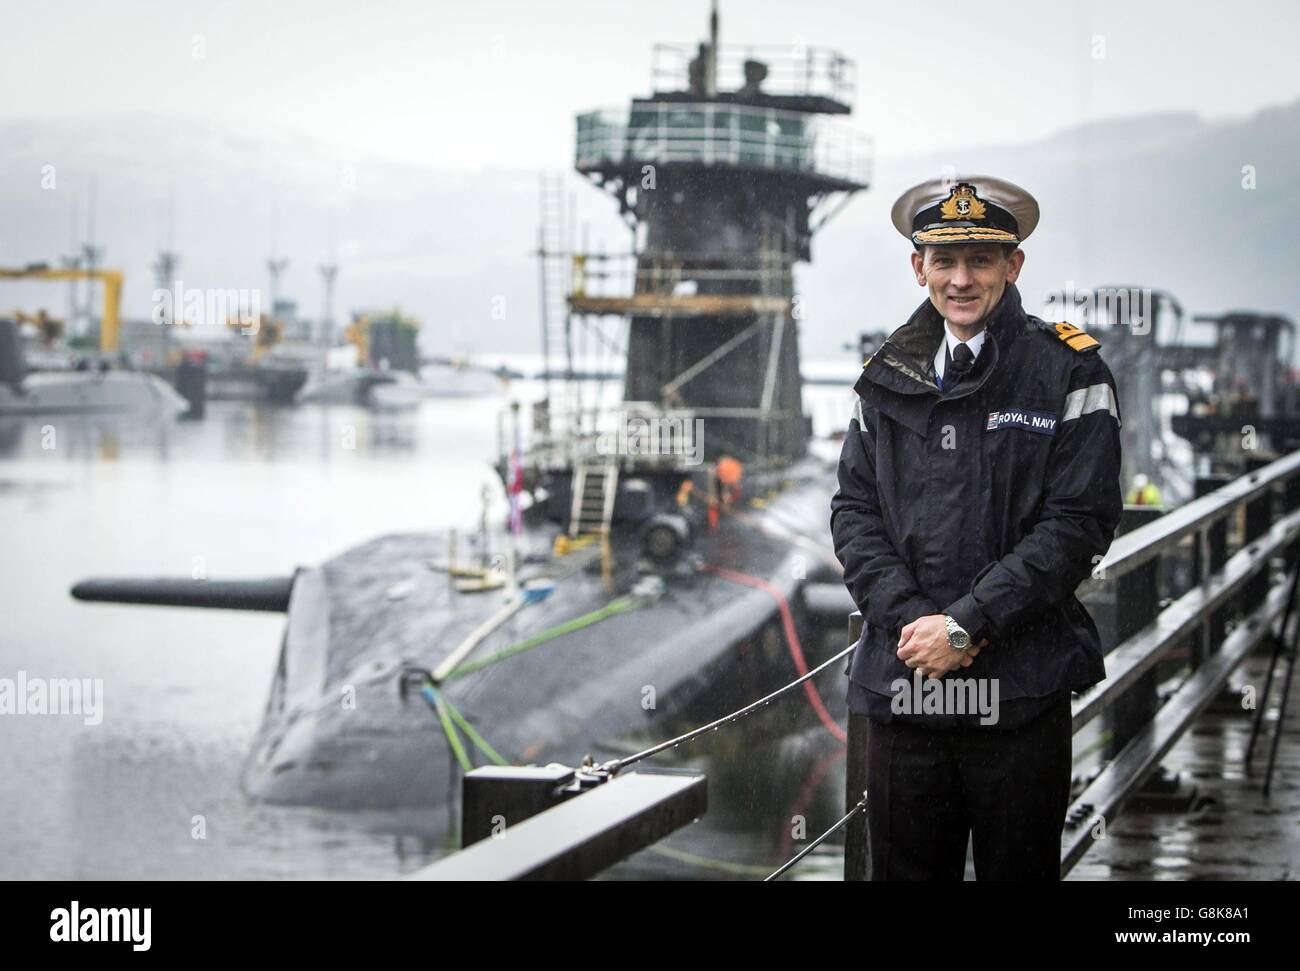 Rear Admiral of Submarines and Assistant Chief of Naval Staff John Weale with Vanguard-class submarine HMS Vigilant, one of the UK's four nuclear warhead-carrying submarines, at HM Naval Base Clyde, also known as Faslane, ahead of a visit by Defence Secretary Michael Fallon. Stock Photo